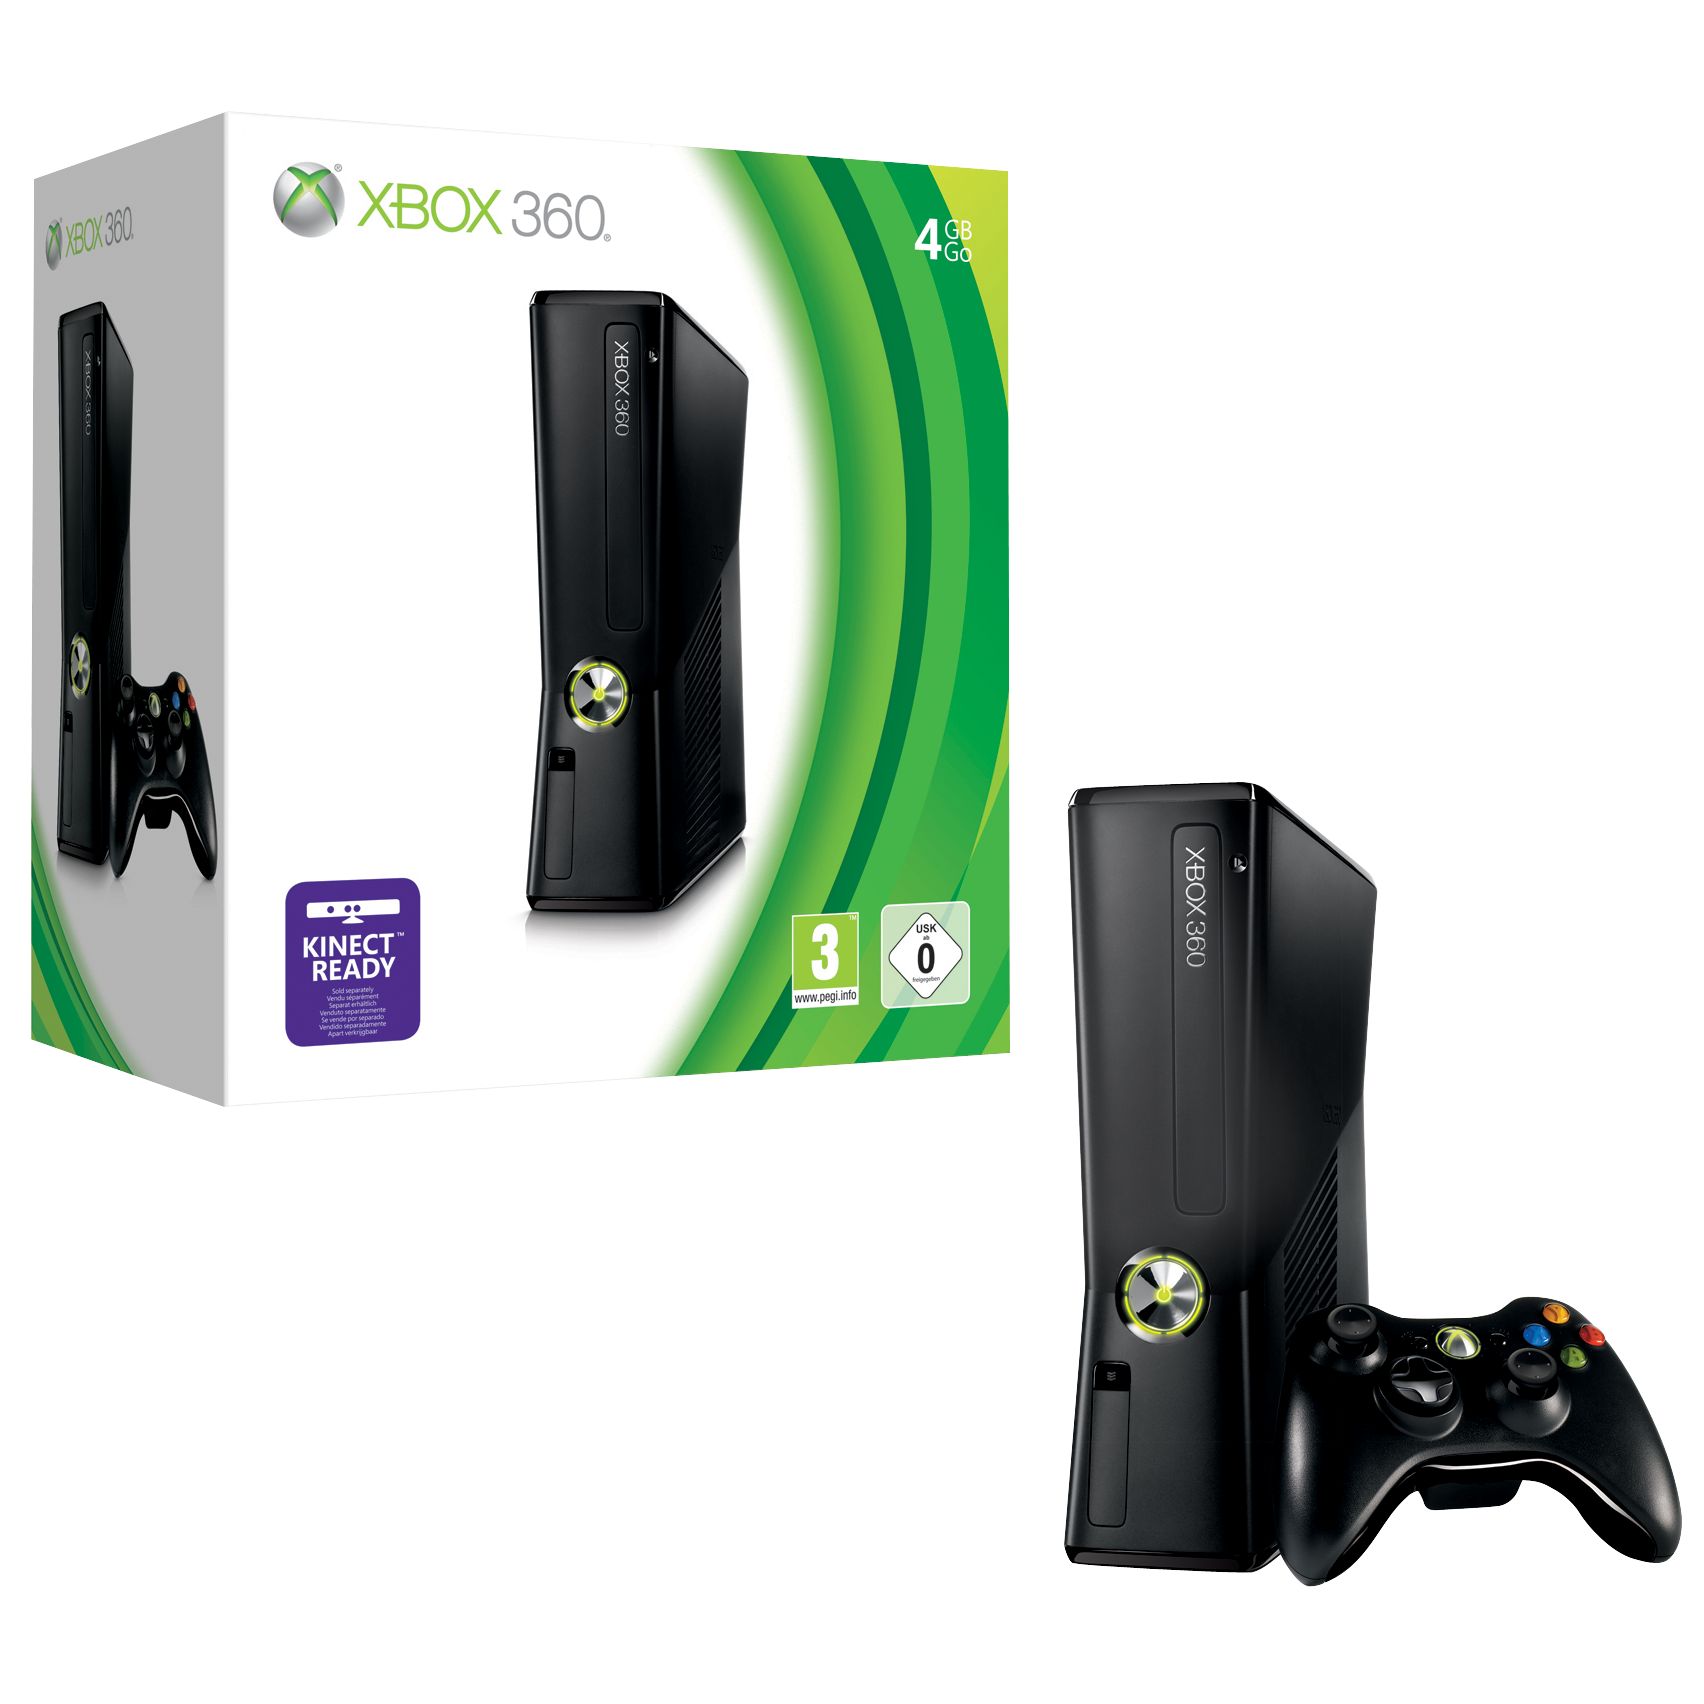 Microsoft Xbox 360 S 4GB Console & Forza Motorsport 3 at JohnLewis